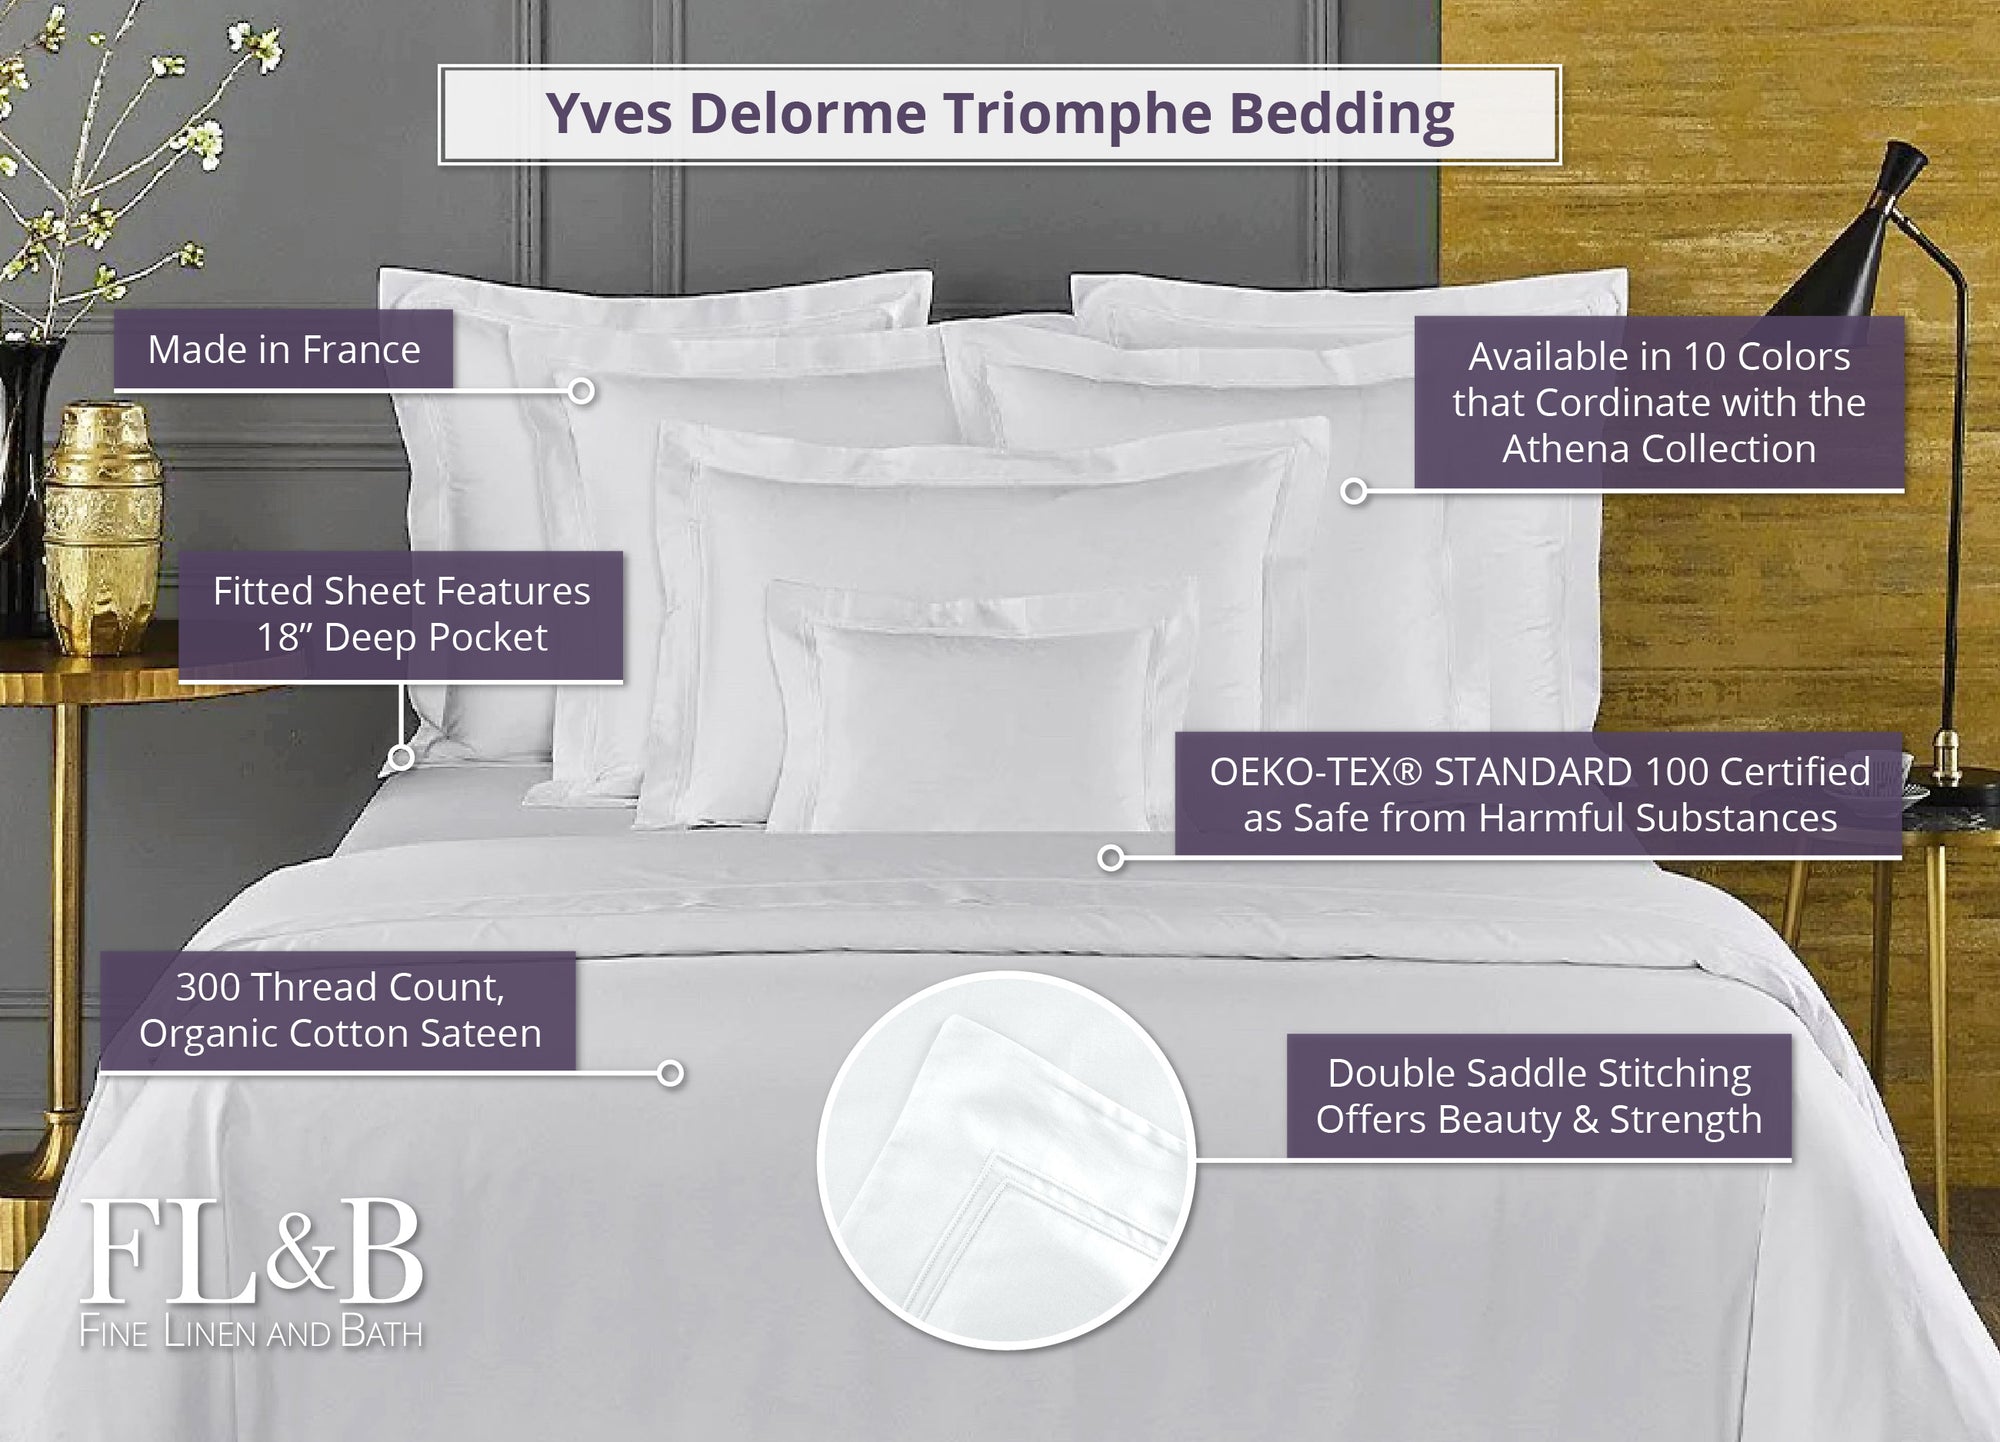 Yves-Delorme-Triomphe-Bedding-PDP-Infographic.jpg